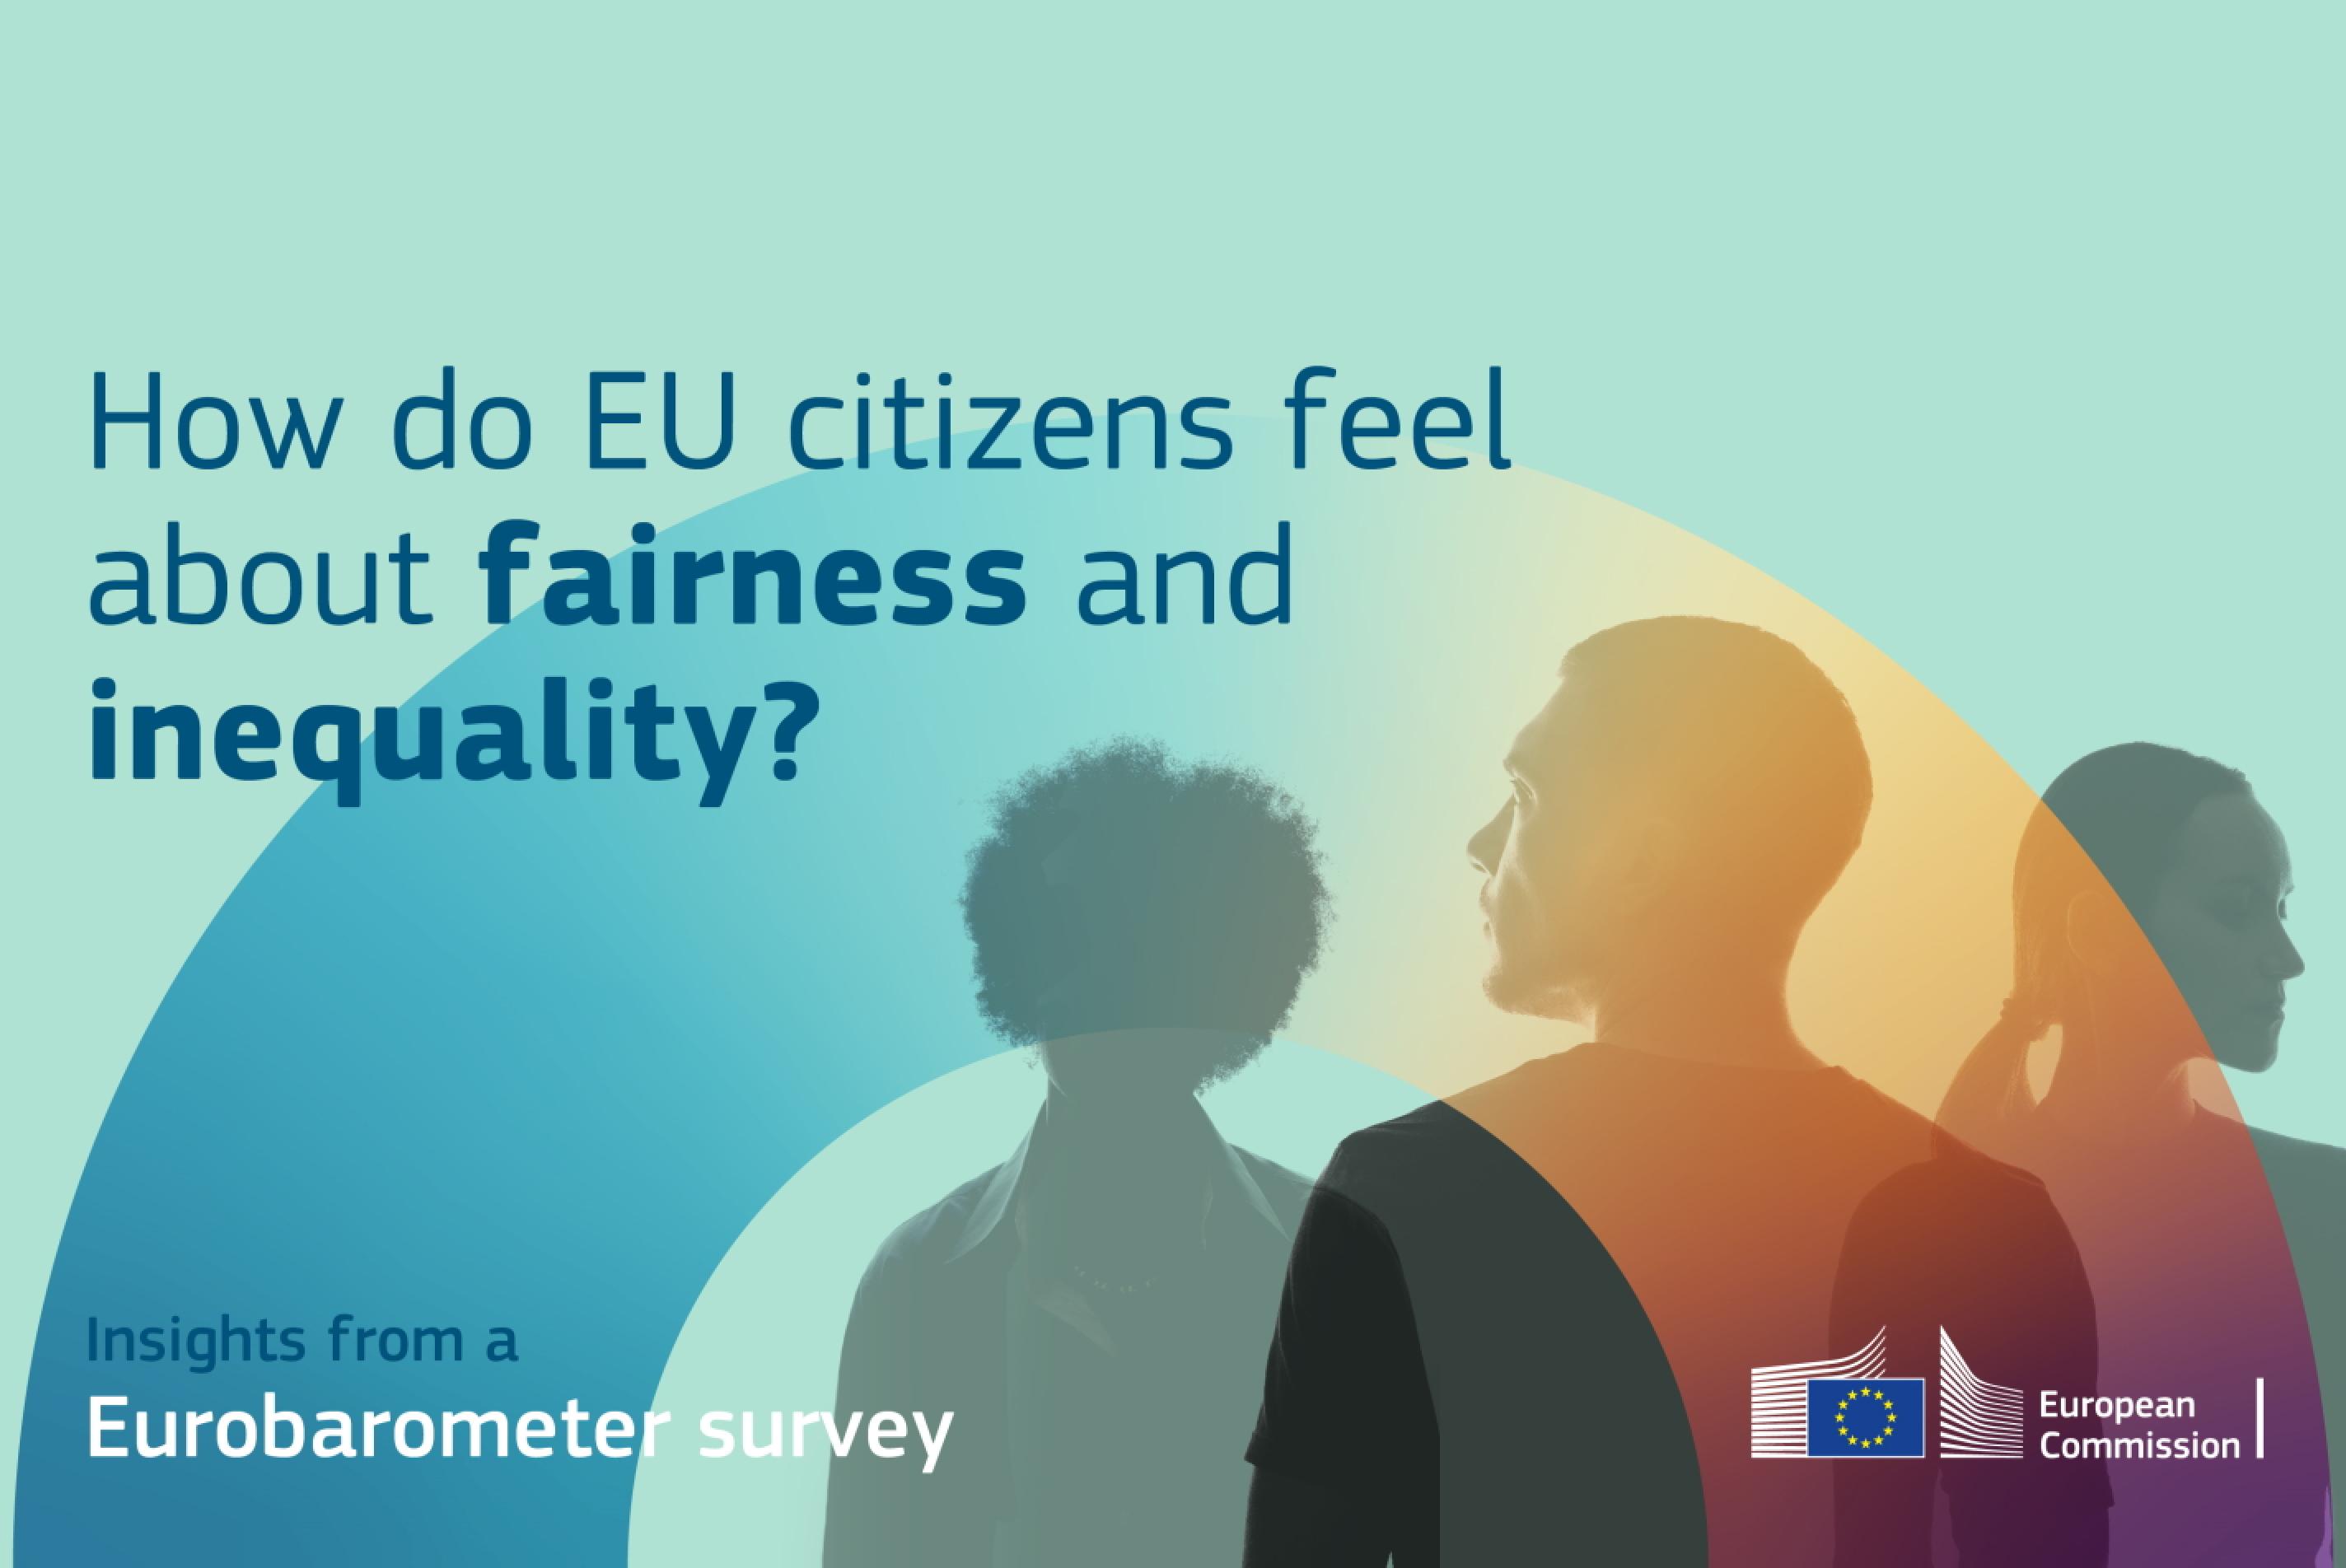 Fairness, inequality, and preferences for social spending and redistribution policies – New Eurobarometer results